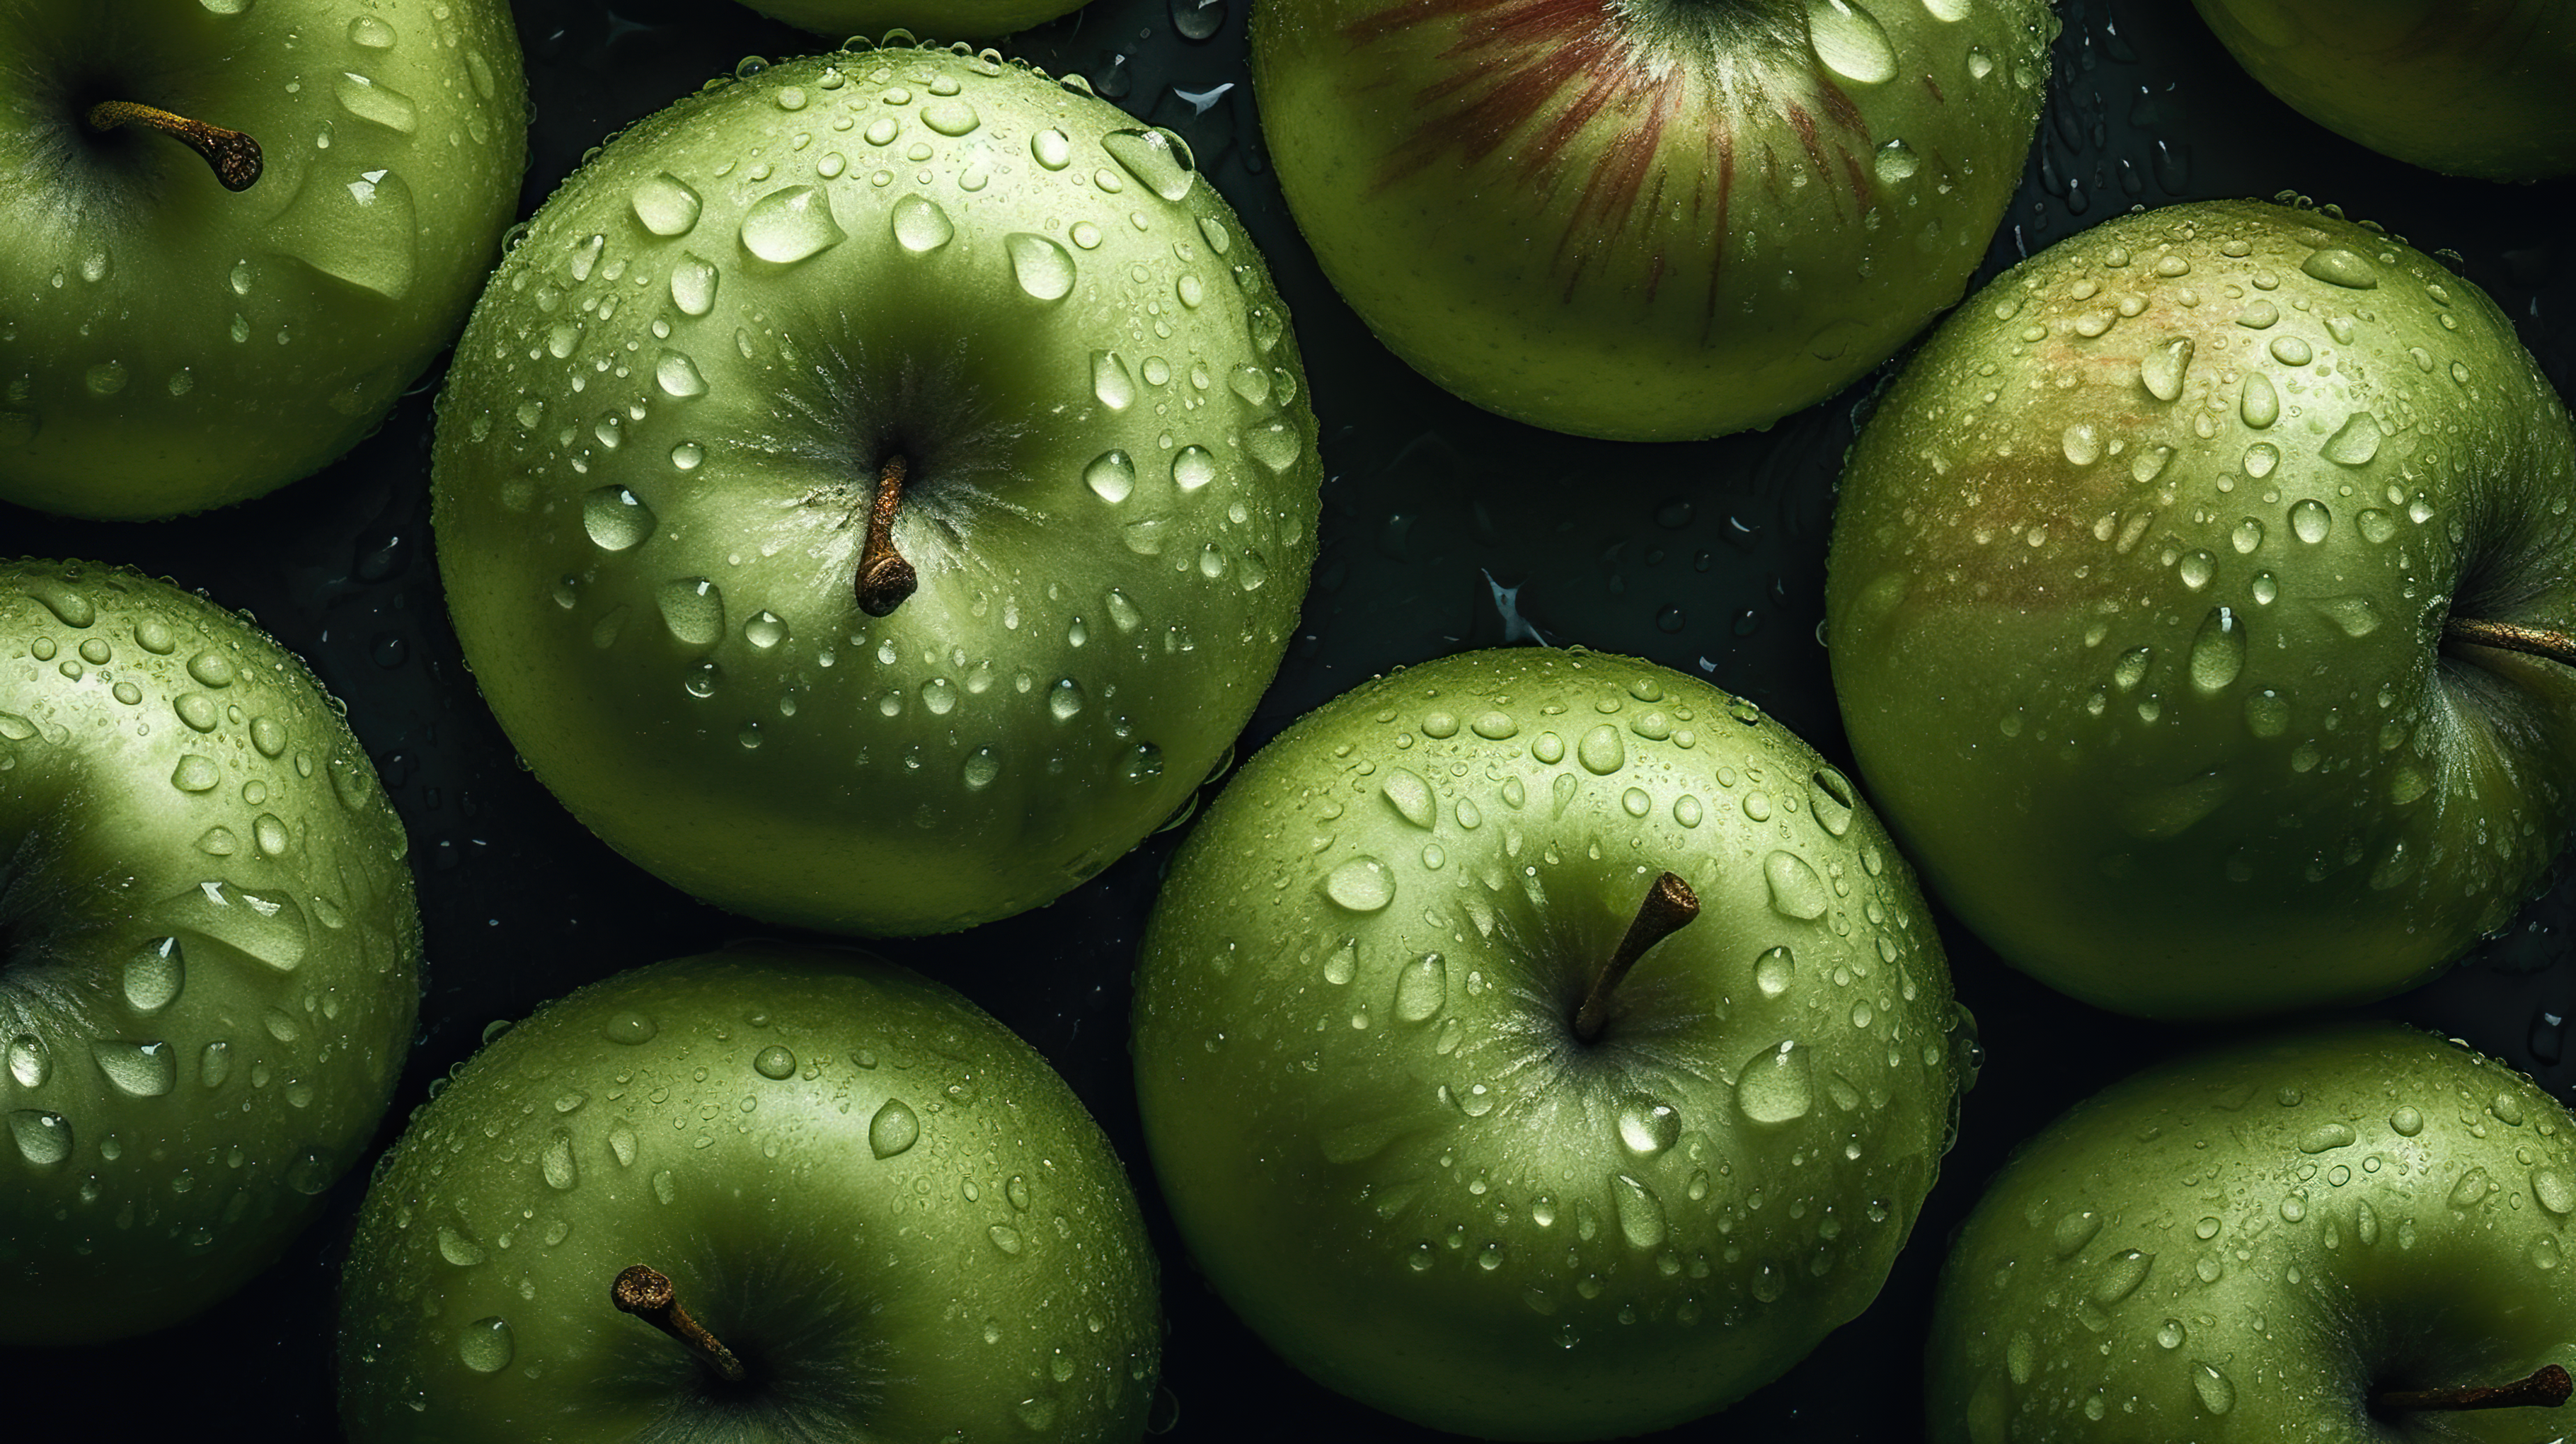 Green Apples with Water Droplets on Black Background